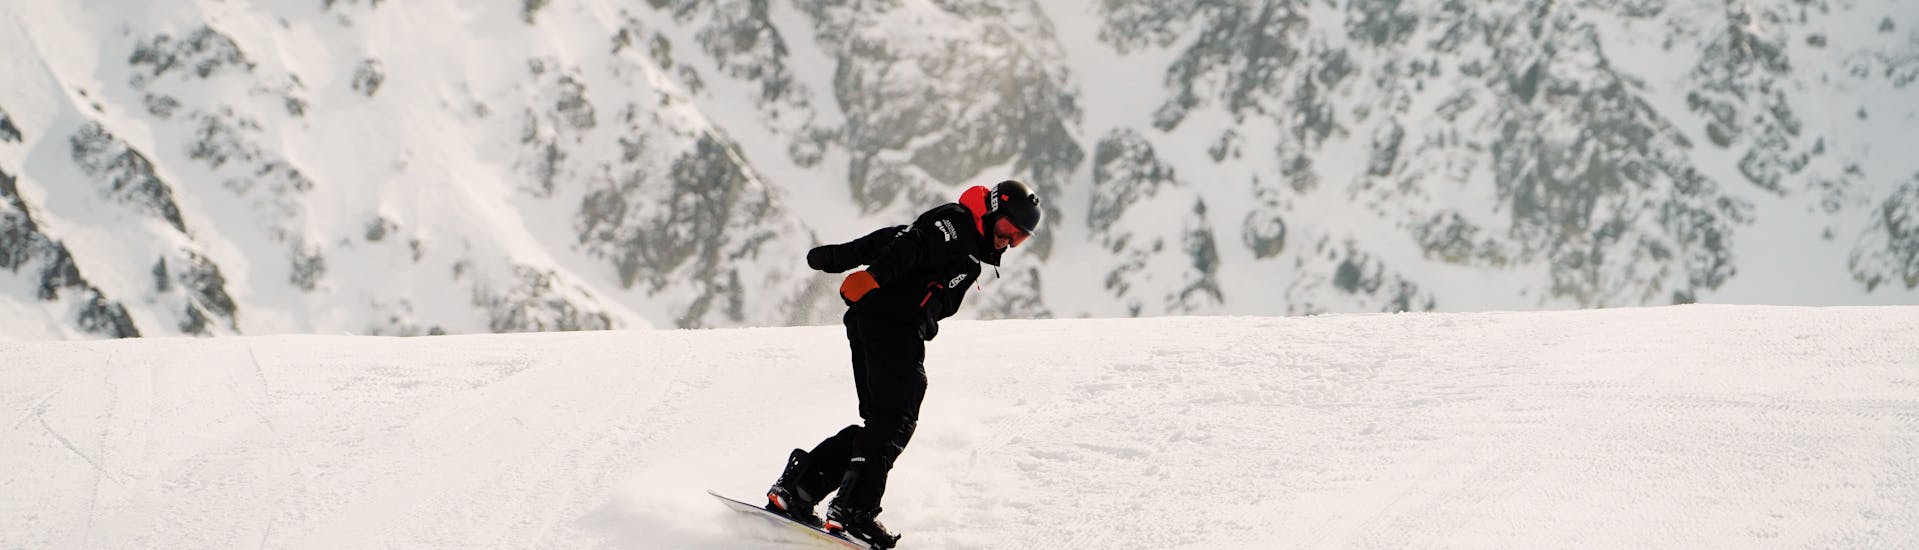 Private Snowboarding Lessons for All Levels & Ages.